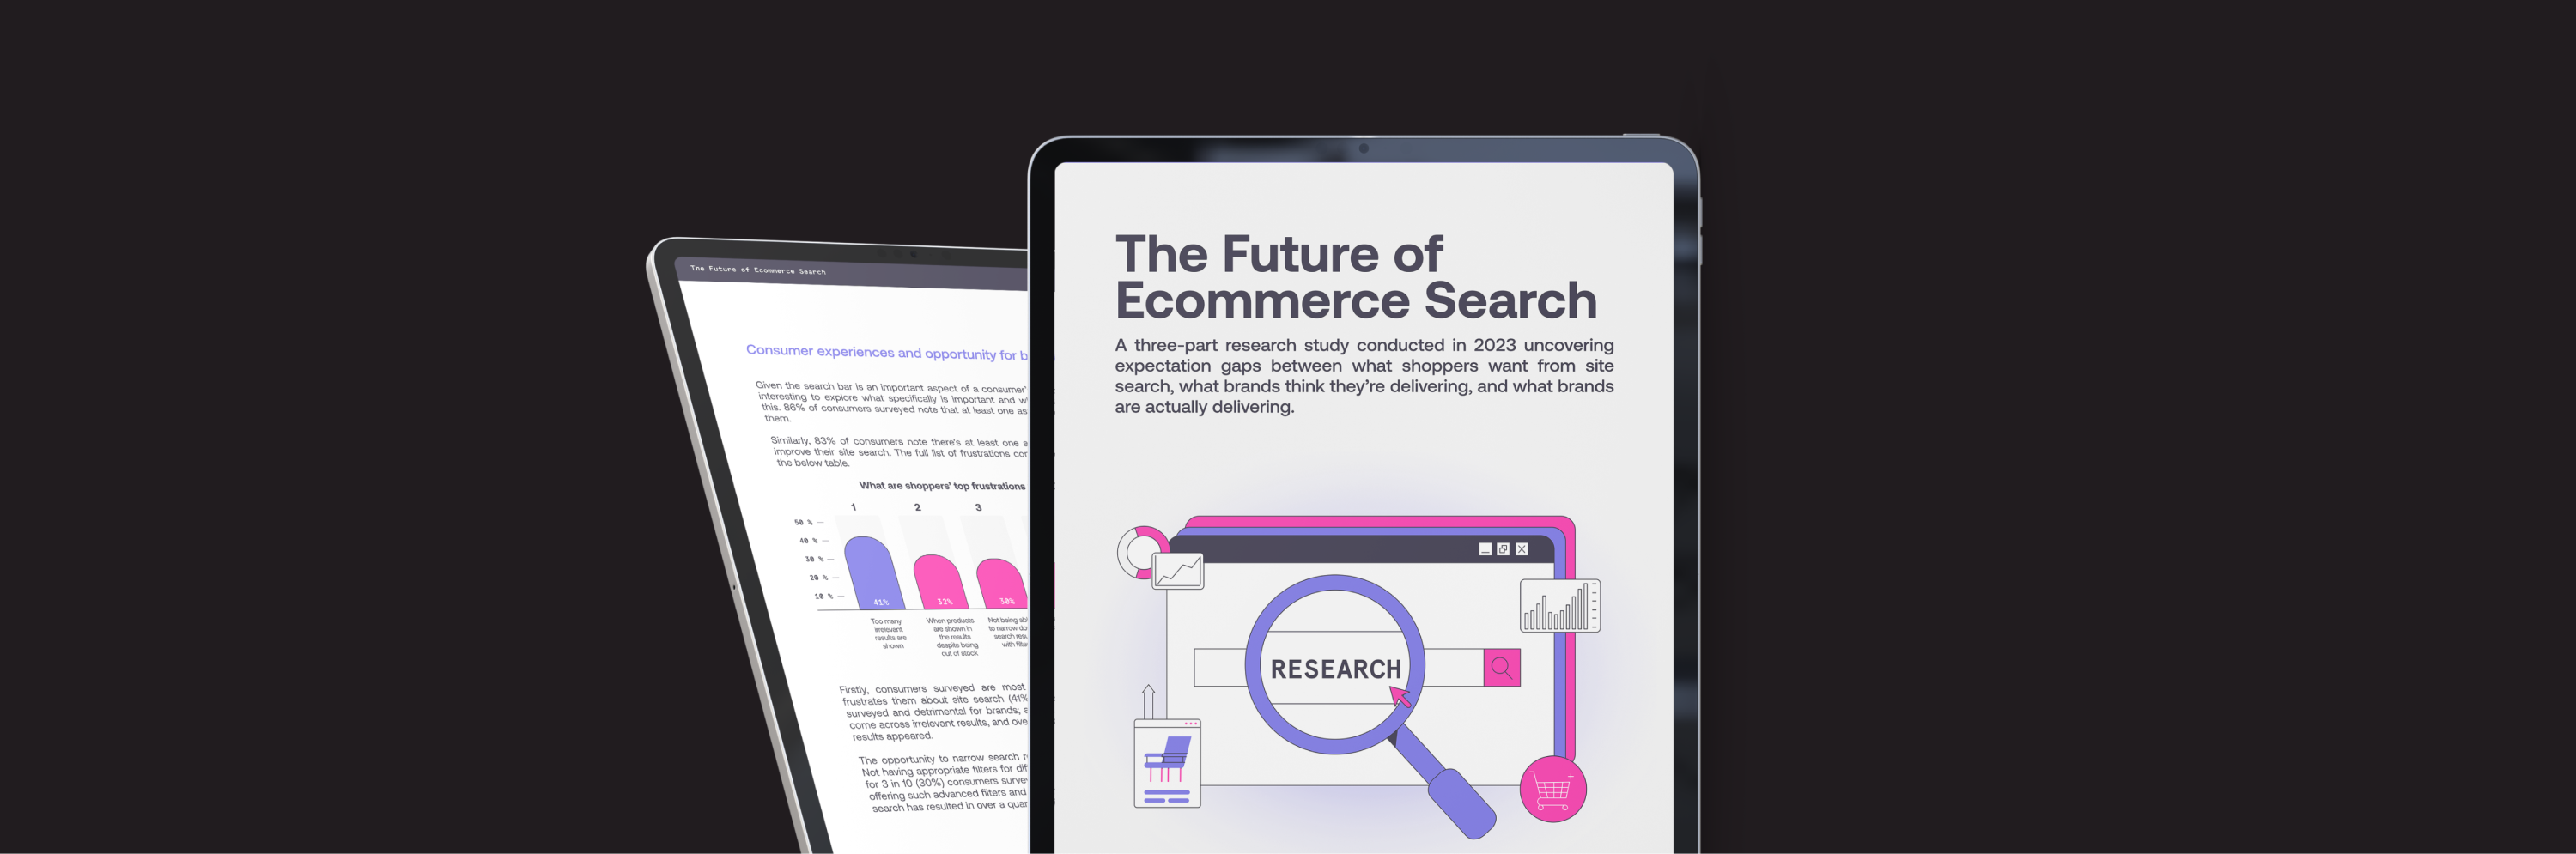 New research: 69% of online shoppers go straight to the search bar when visiting ecommerce sites, but 80% leave due to a poor experience 